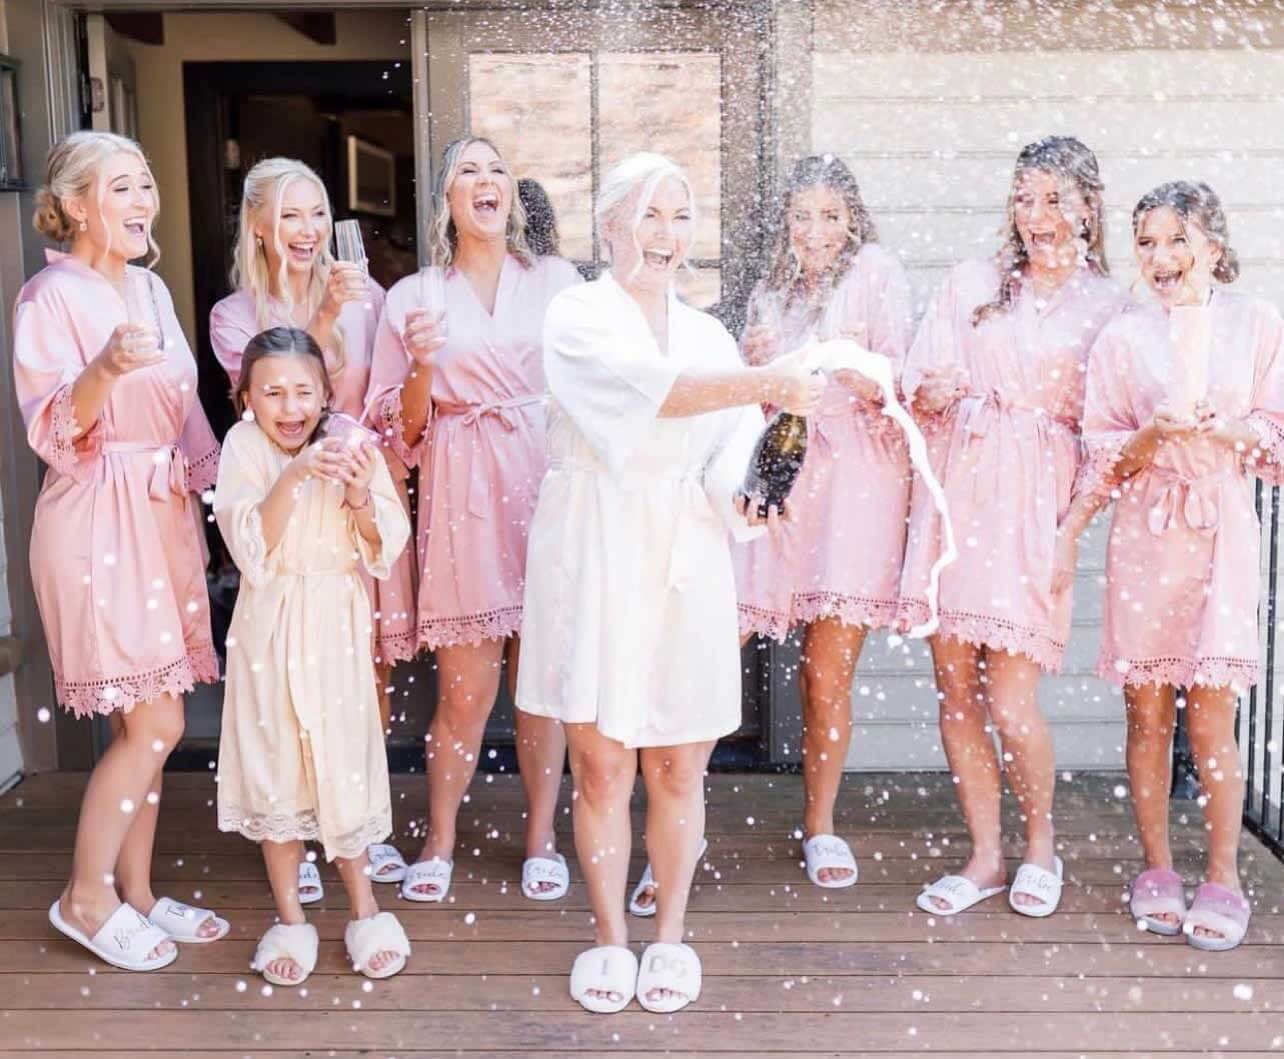 A group of bridesmaids in pink robes holding confetti during a wedding experience.